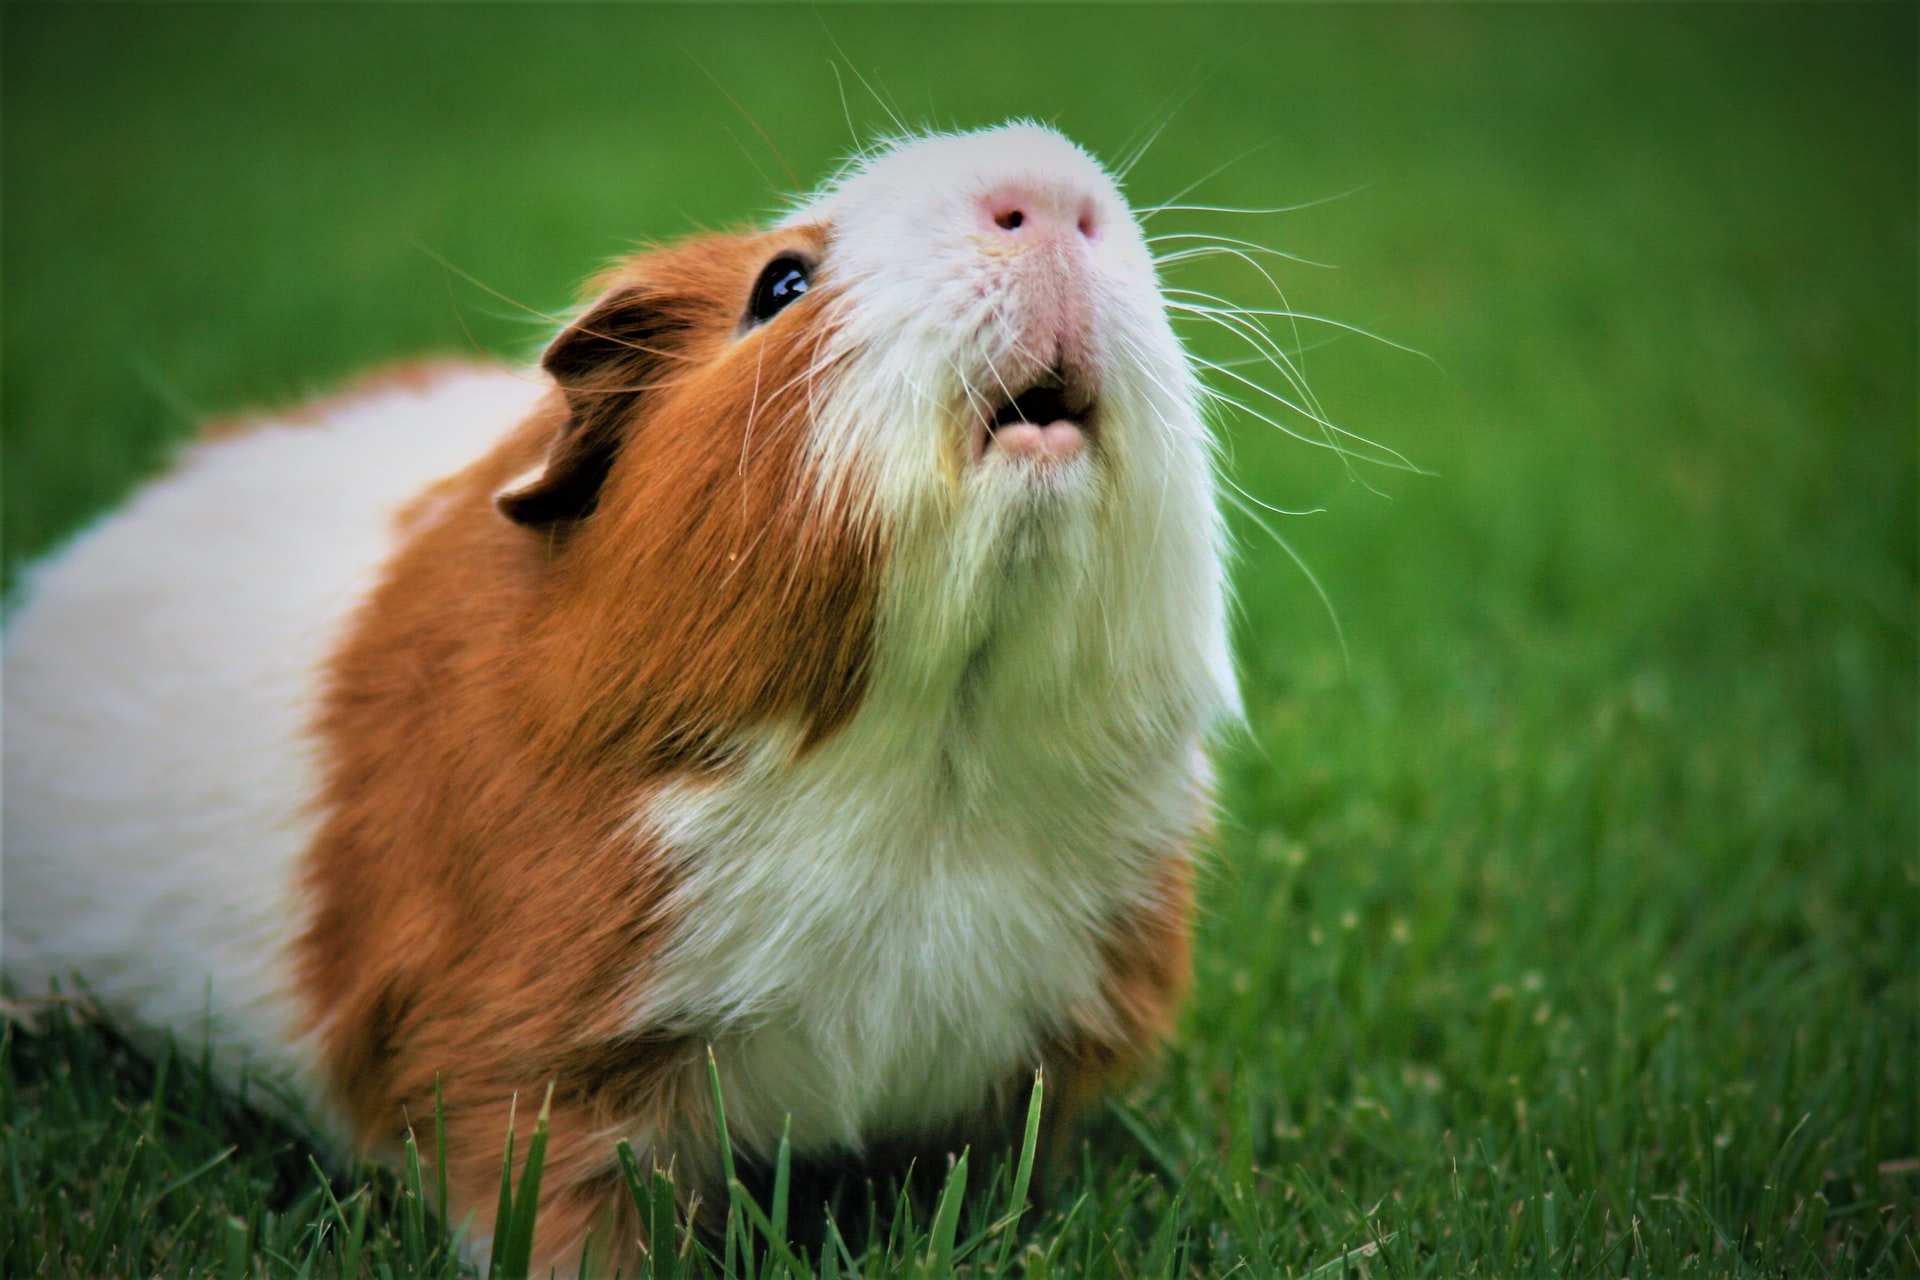 Guinea pigs are not real pigs